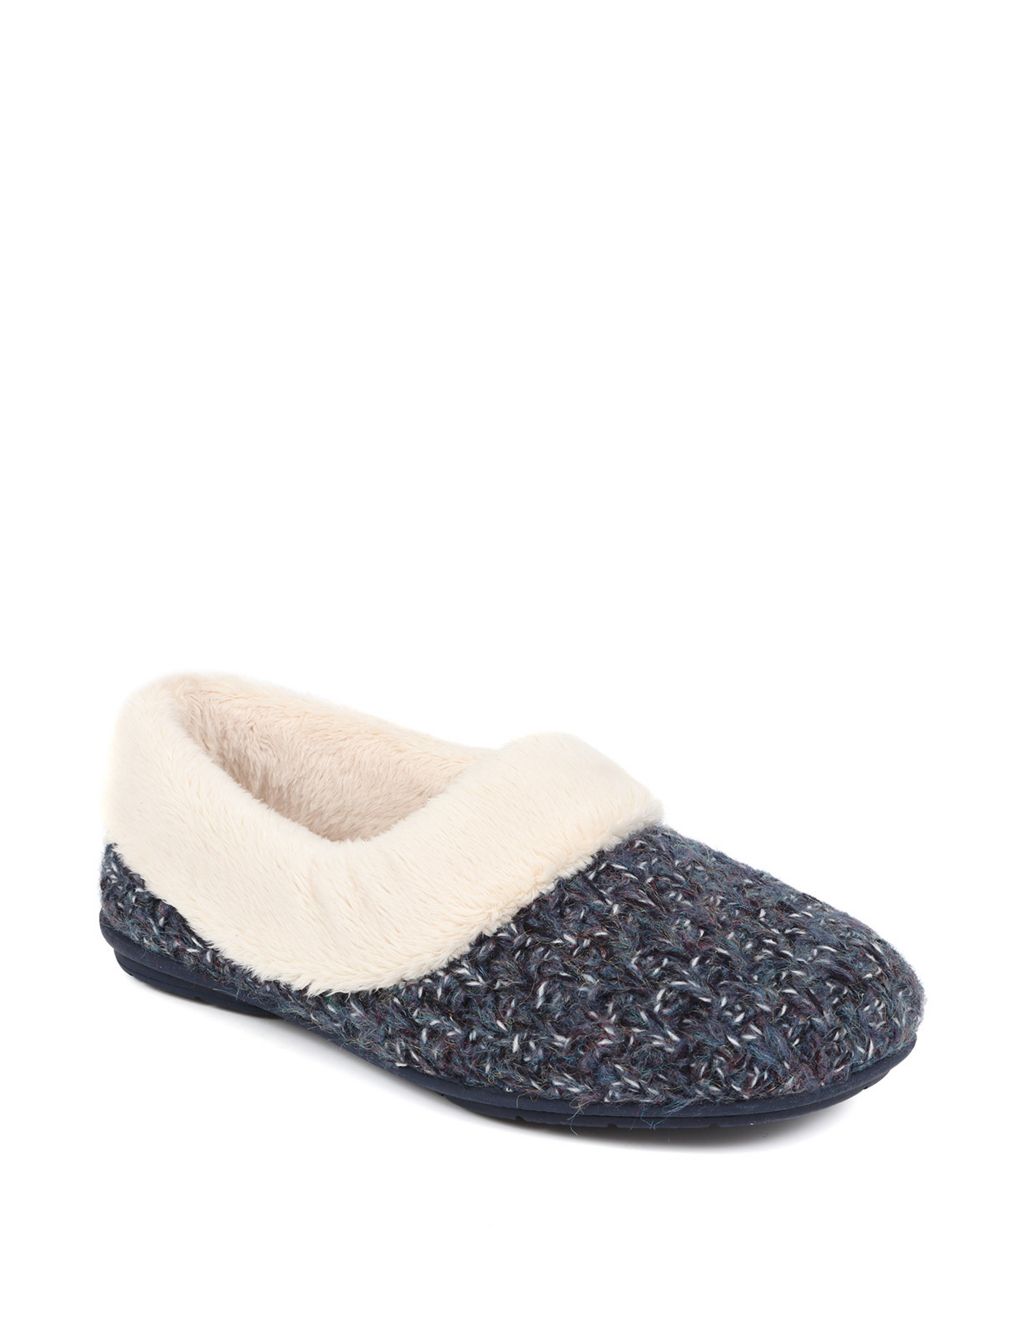 Faux Fur Lined Round Toe Slippers image 2